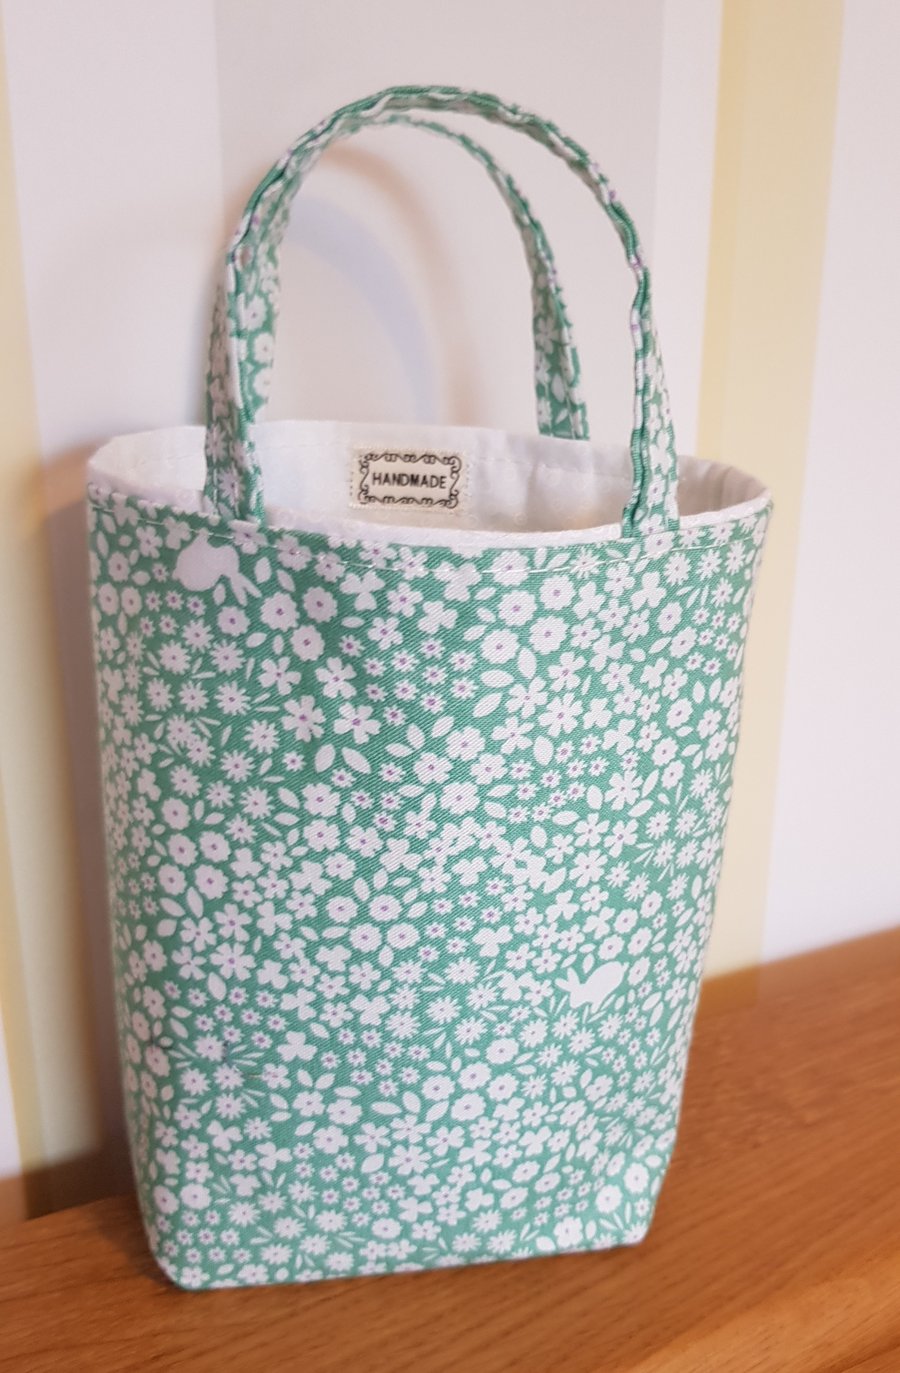 Mini Easter gift bag: green with bunnies